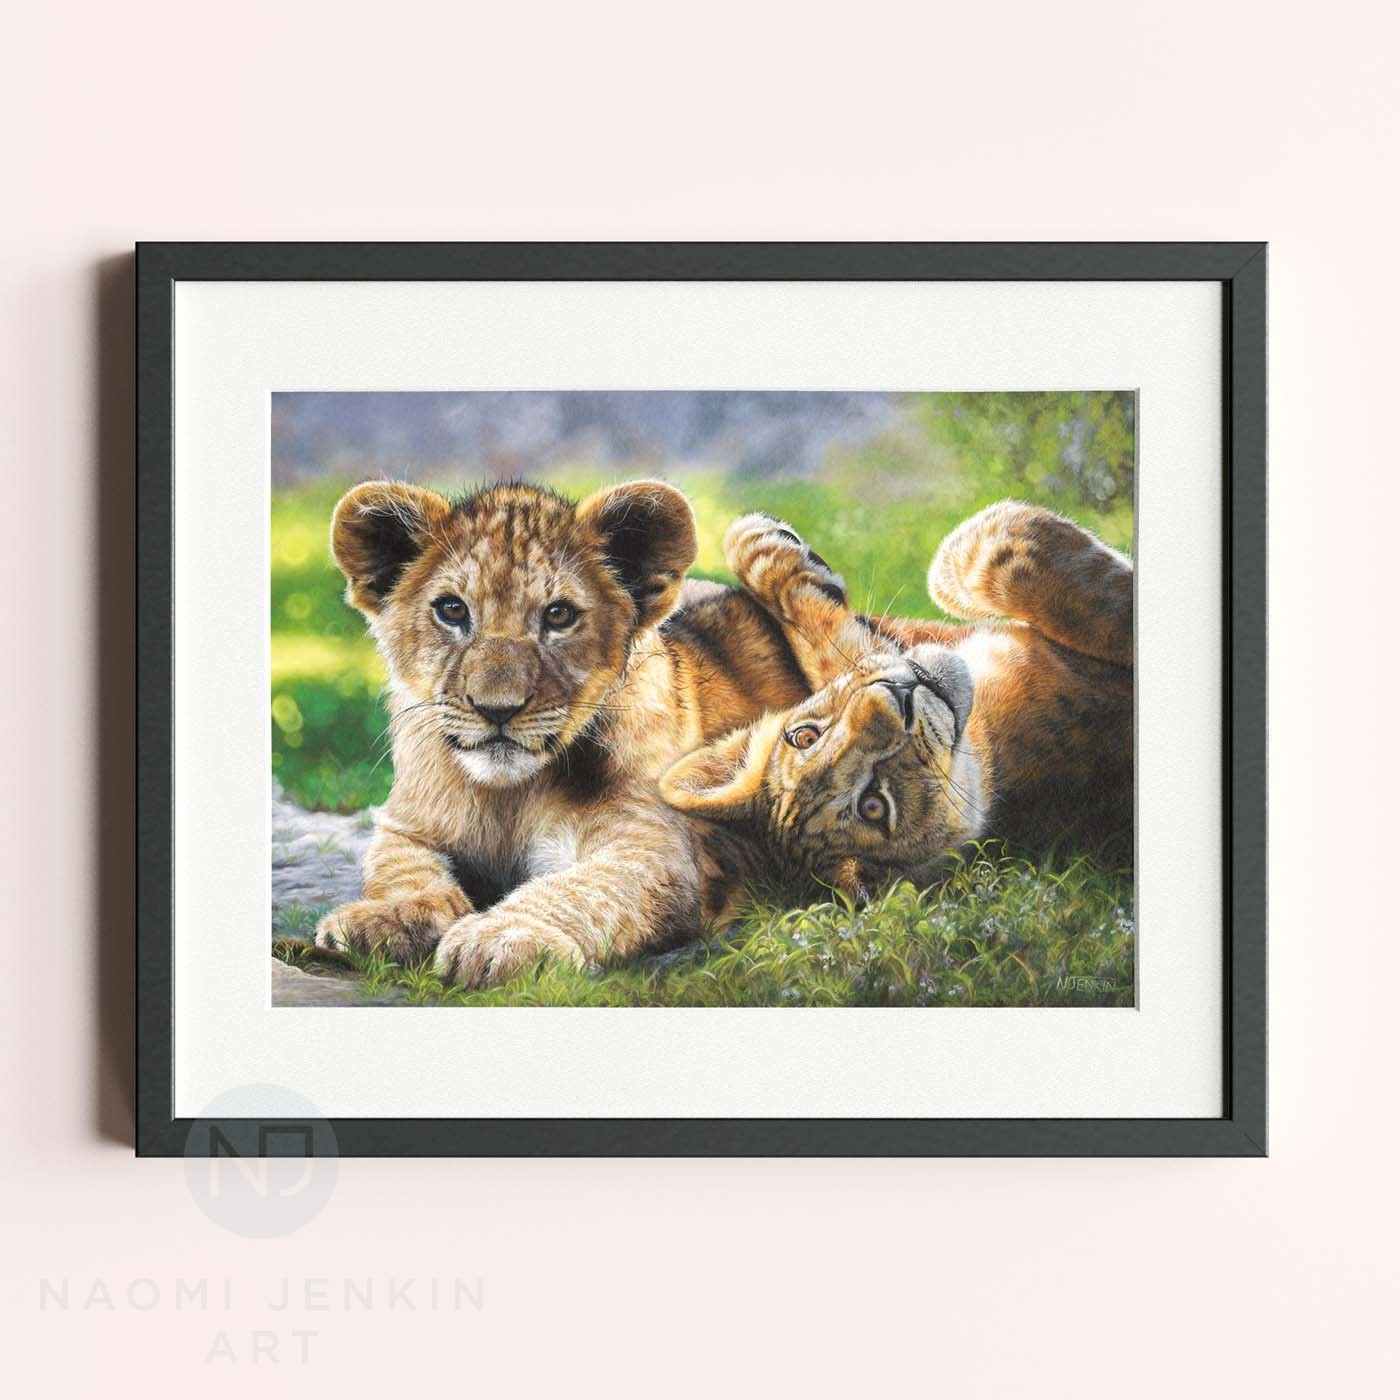 Lion art  prints of two cubs by wildlife artist Naomi Jenkin.